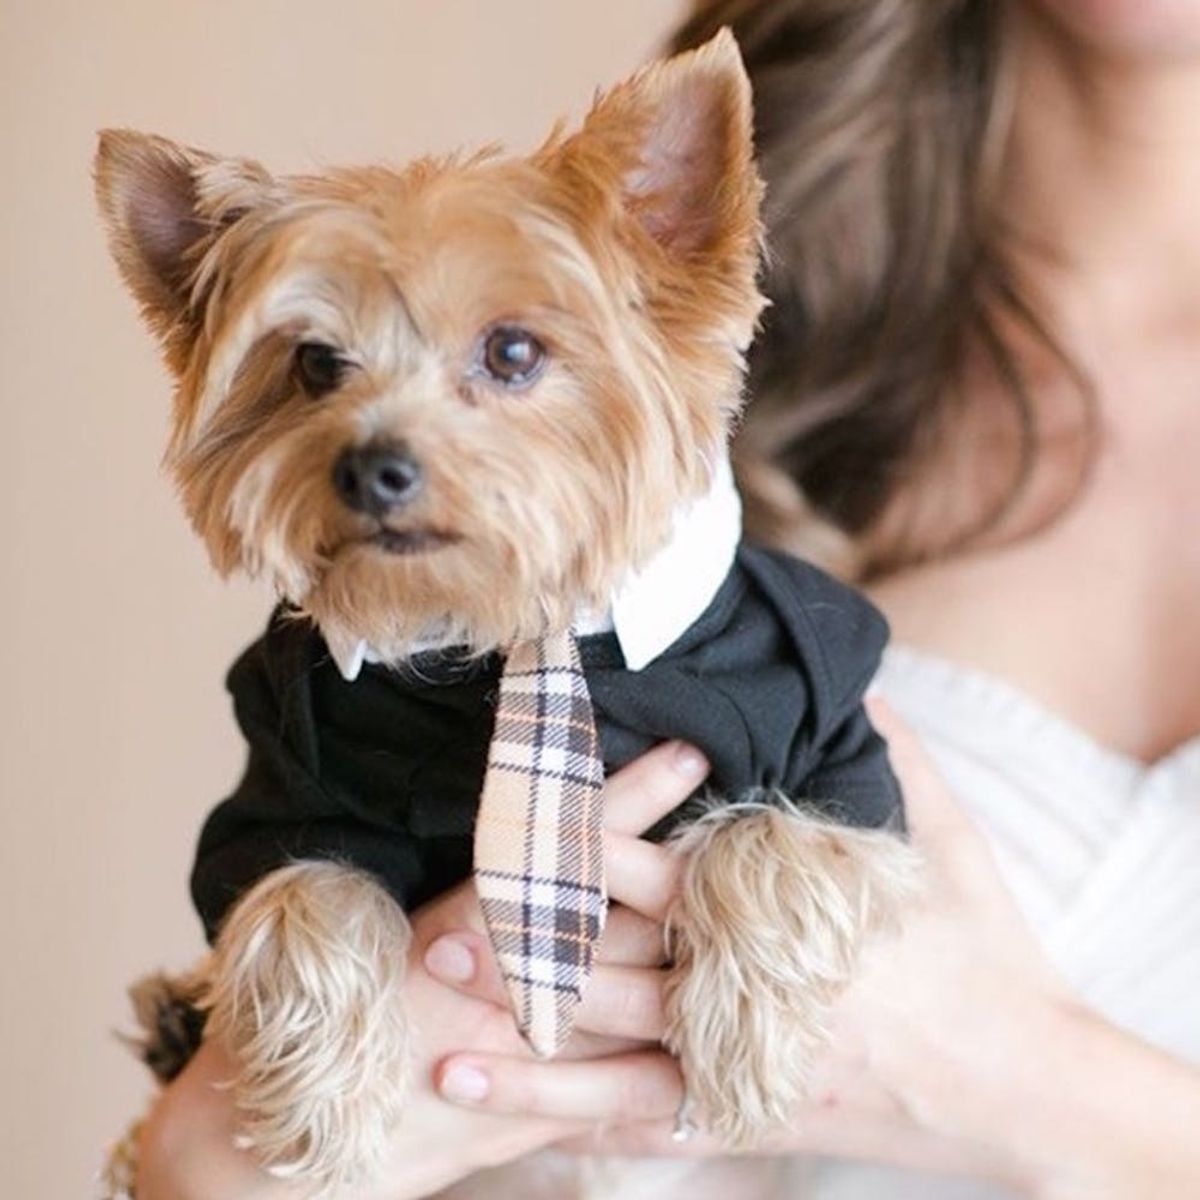 17 Creative Ways to Make Your Pet a Part of Your Wedding